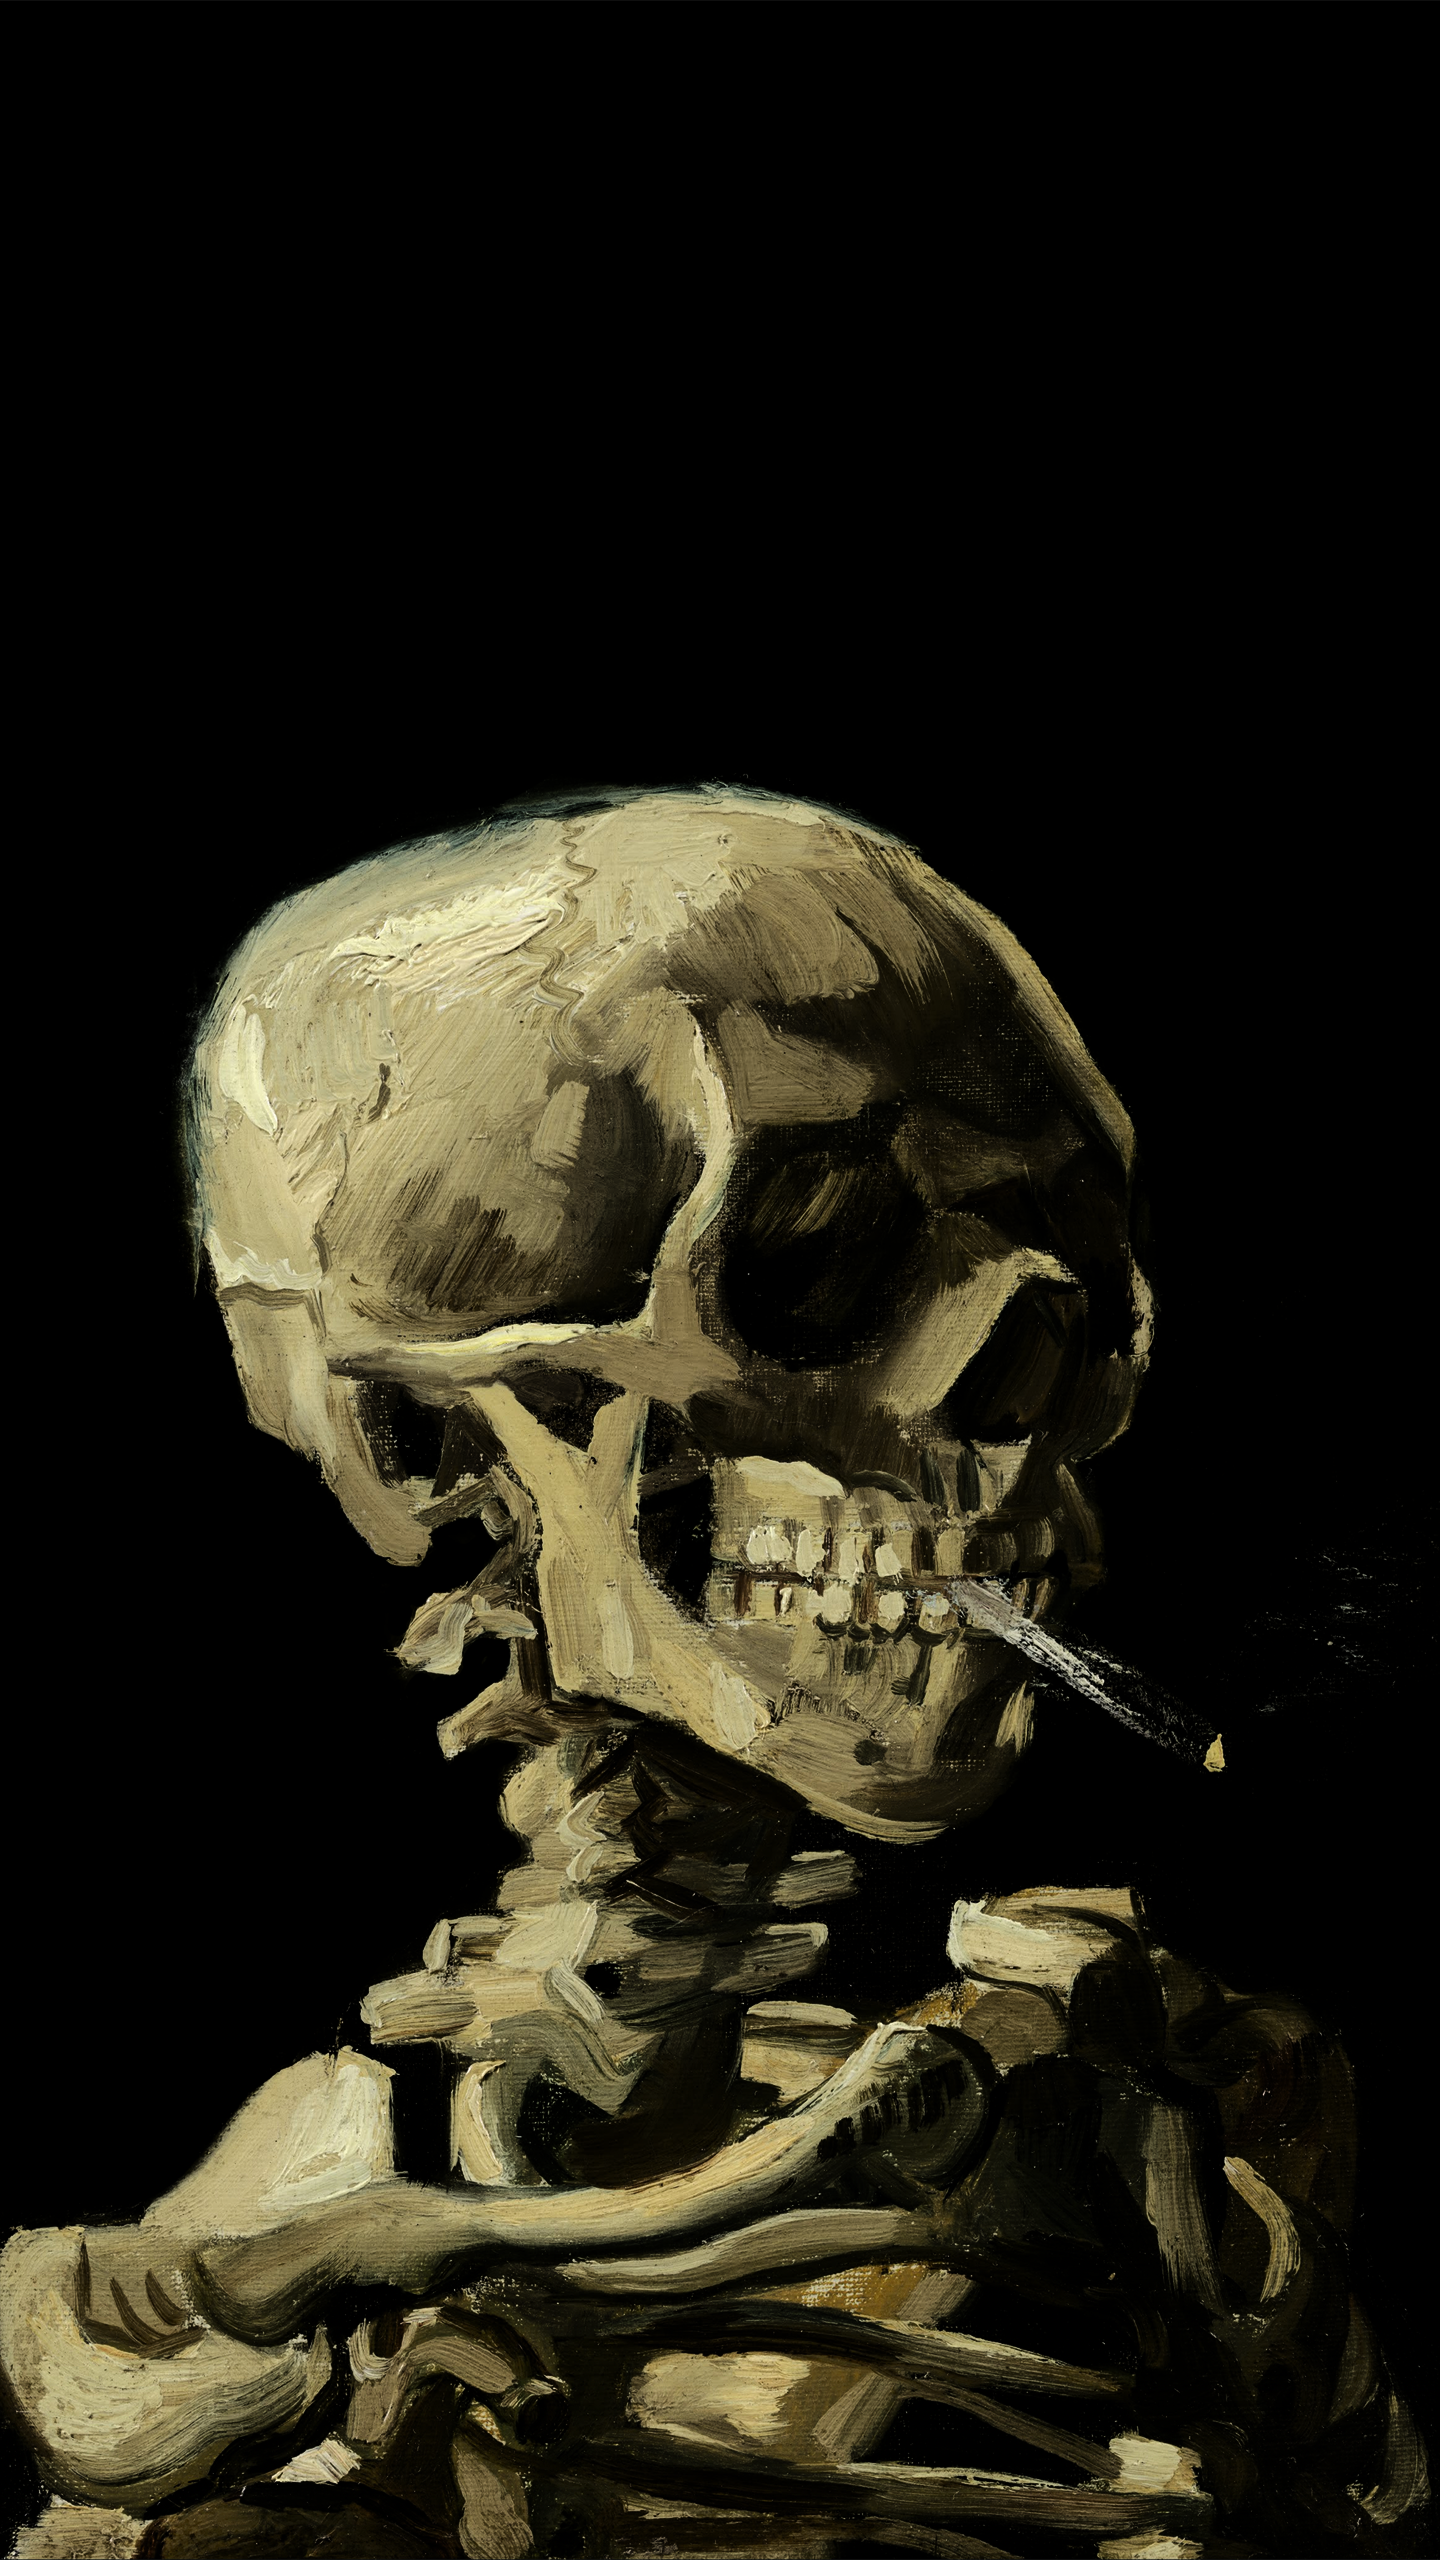 Skull of a Skeleton with Burning Cigarette' by Vincent van Gogh, 1885 [1440x2560]